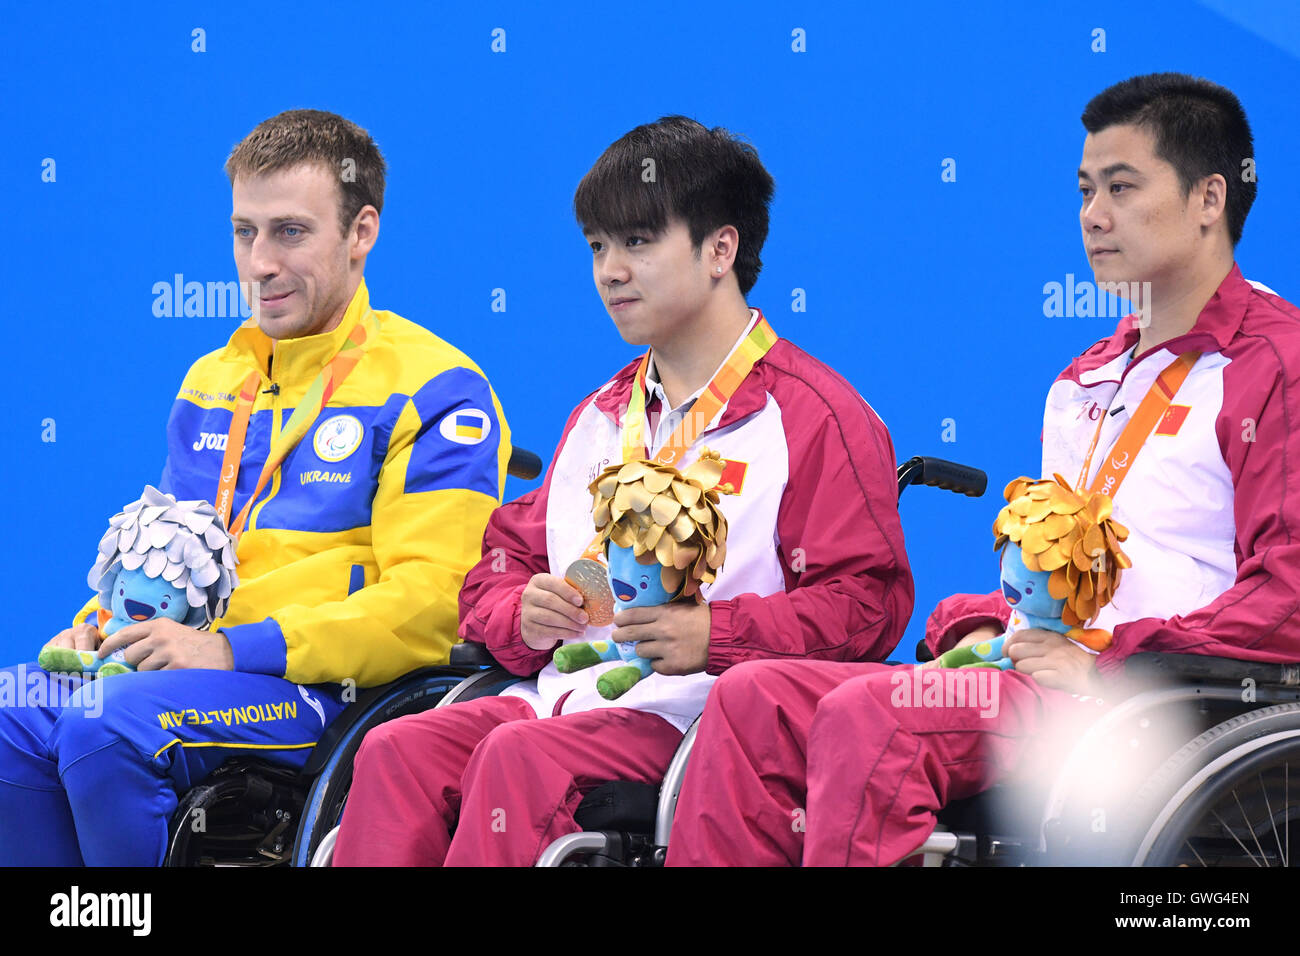 Rio de Janeiro, Brazil. 13th Sep, 2016. (L-R) Dmytro Vynohradets (UKR), Wenpan Huang, Hanhua Li (CHN) Swimming : Men's 50m Freestyle S3 Medal Ceremony at Olympic Aquatics Stadium during the Rio 2016 Paralympic Games in Rio de Janeiro, Brazil . Credit:  AFLO SPORT/Alamy Live News Stock Photo